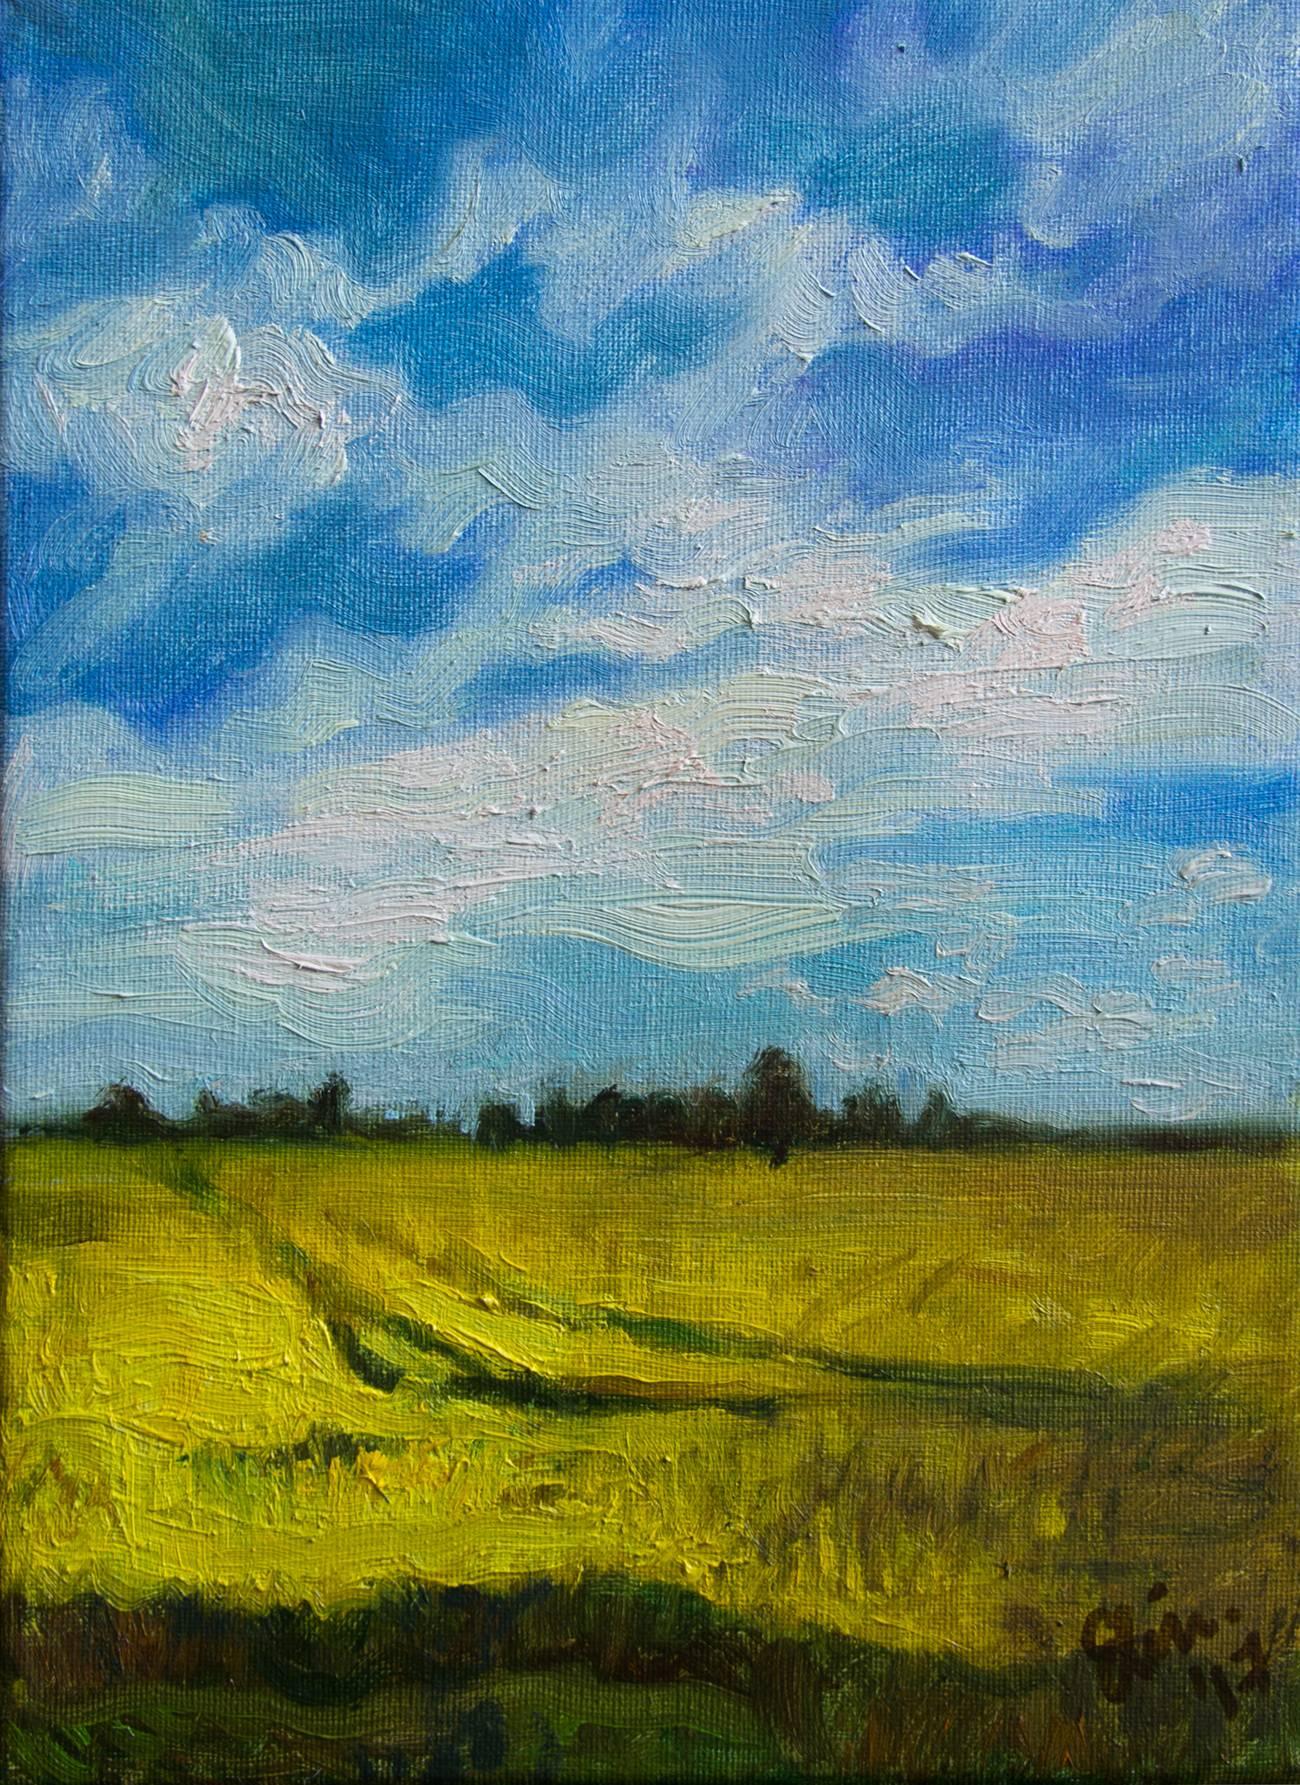 Title: Rapeseed field landscape
Artist: Elina Arbidane (emerging contemporary impressionism painter), Latvia
Original miniature hand-painted impressionist oil on canvas yellow rape field landscape
Not a print or copy, only one available
Unframed